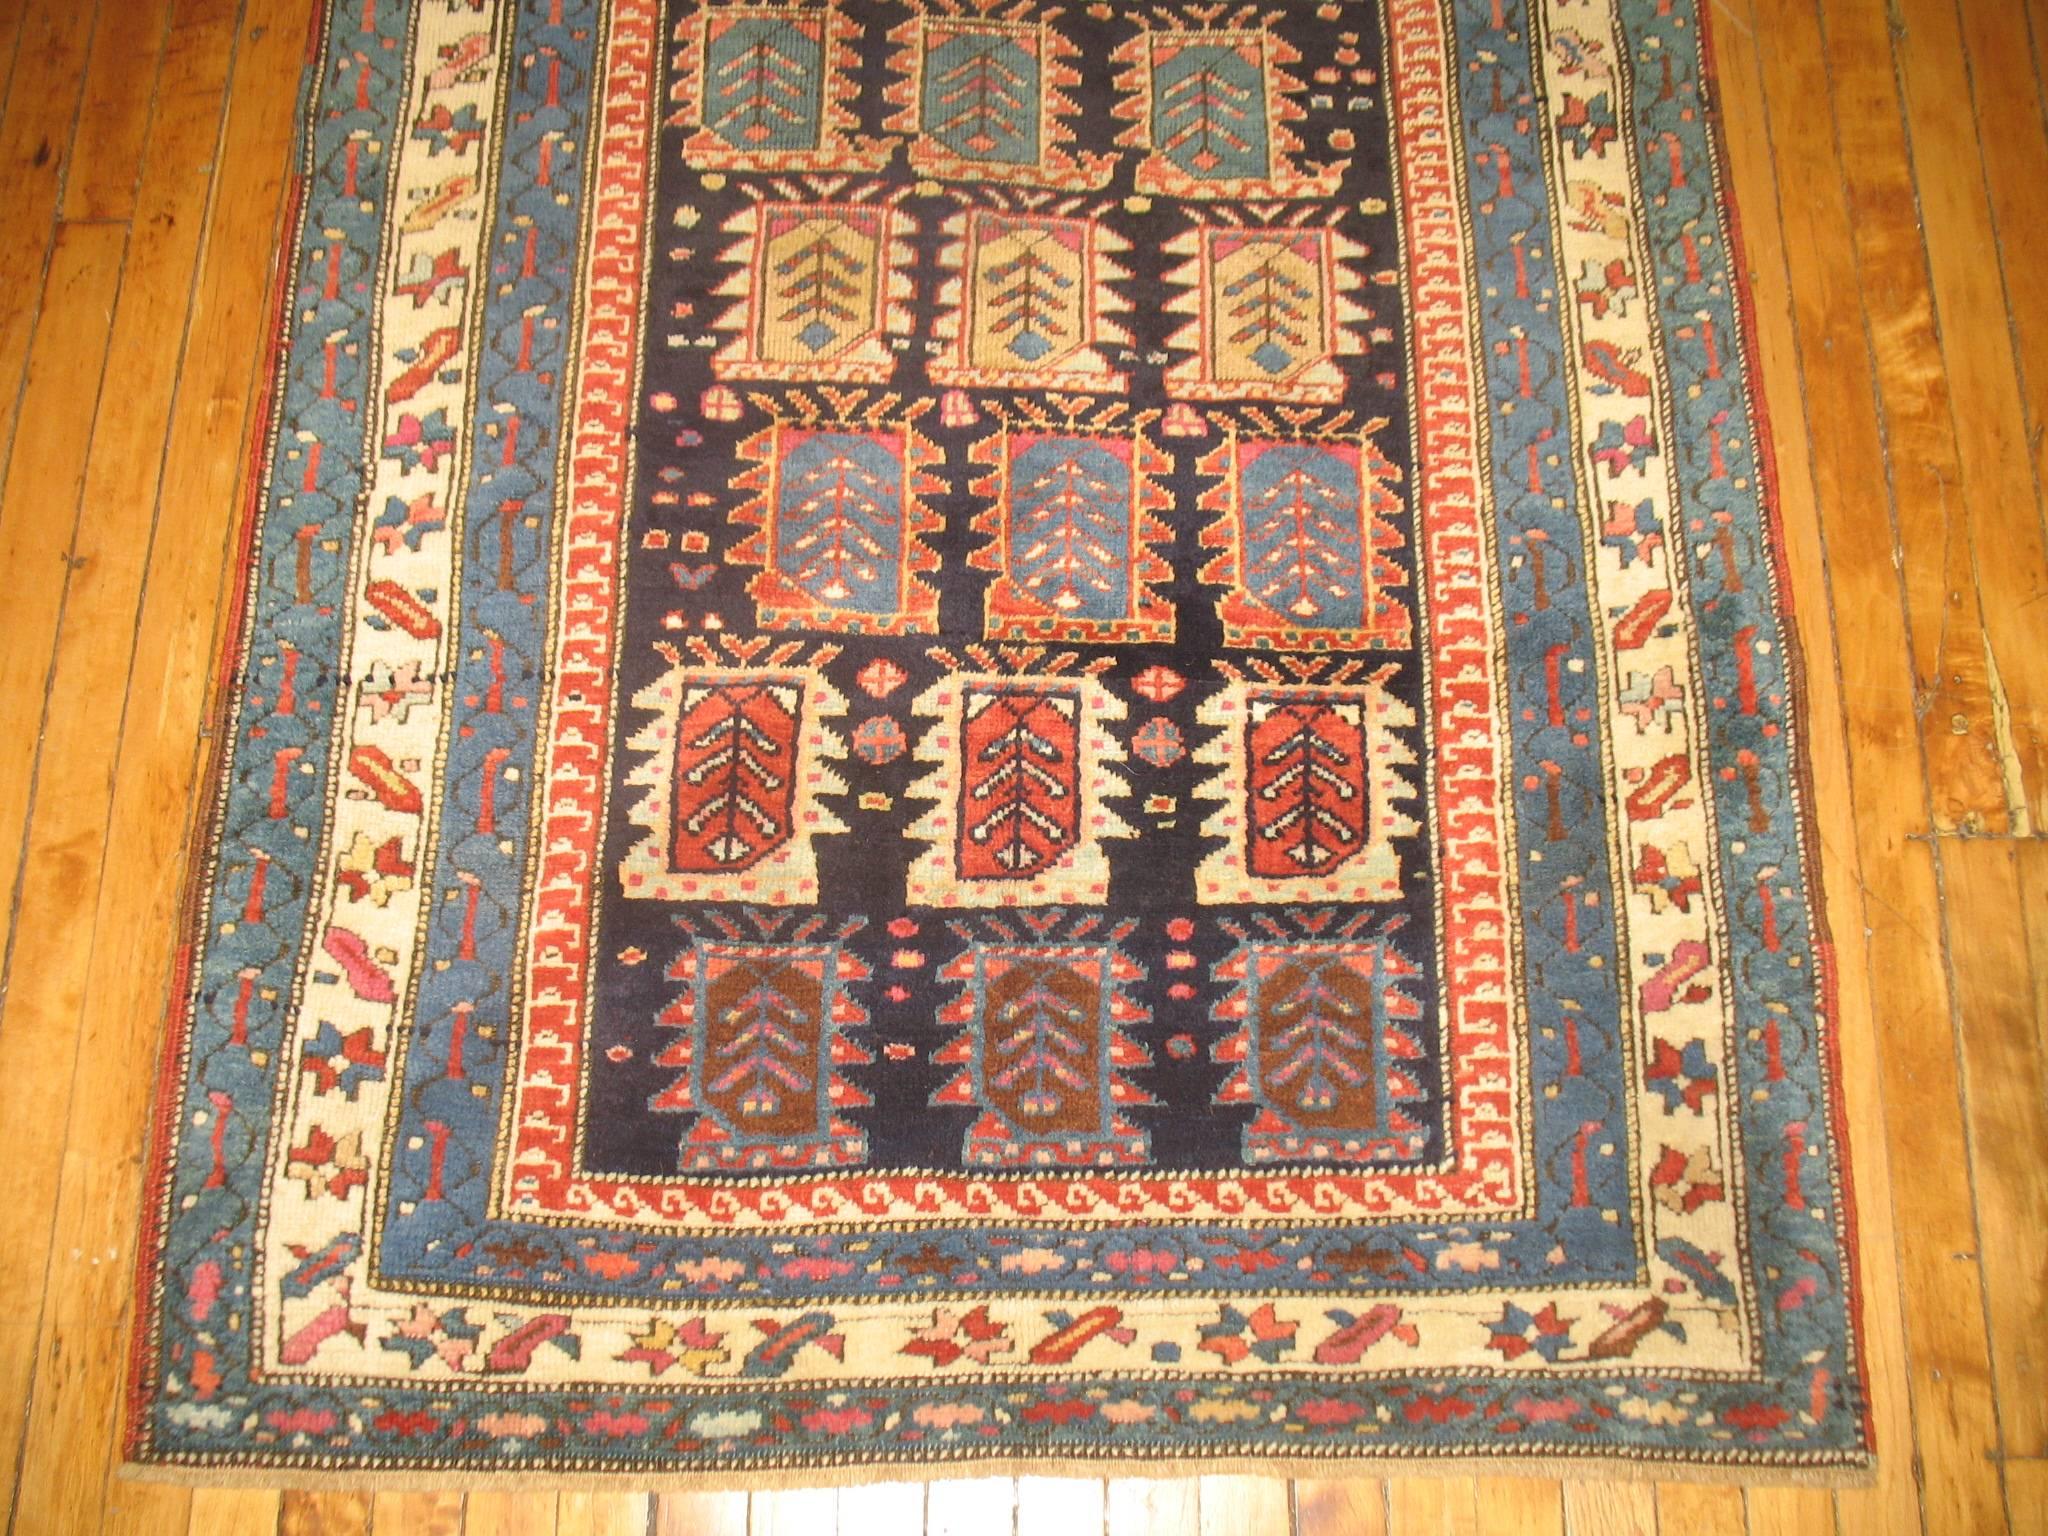 American Classical Antique Caucasian Runner with Paisley Motif